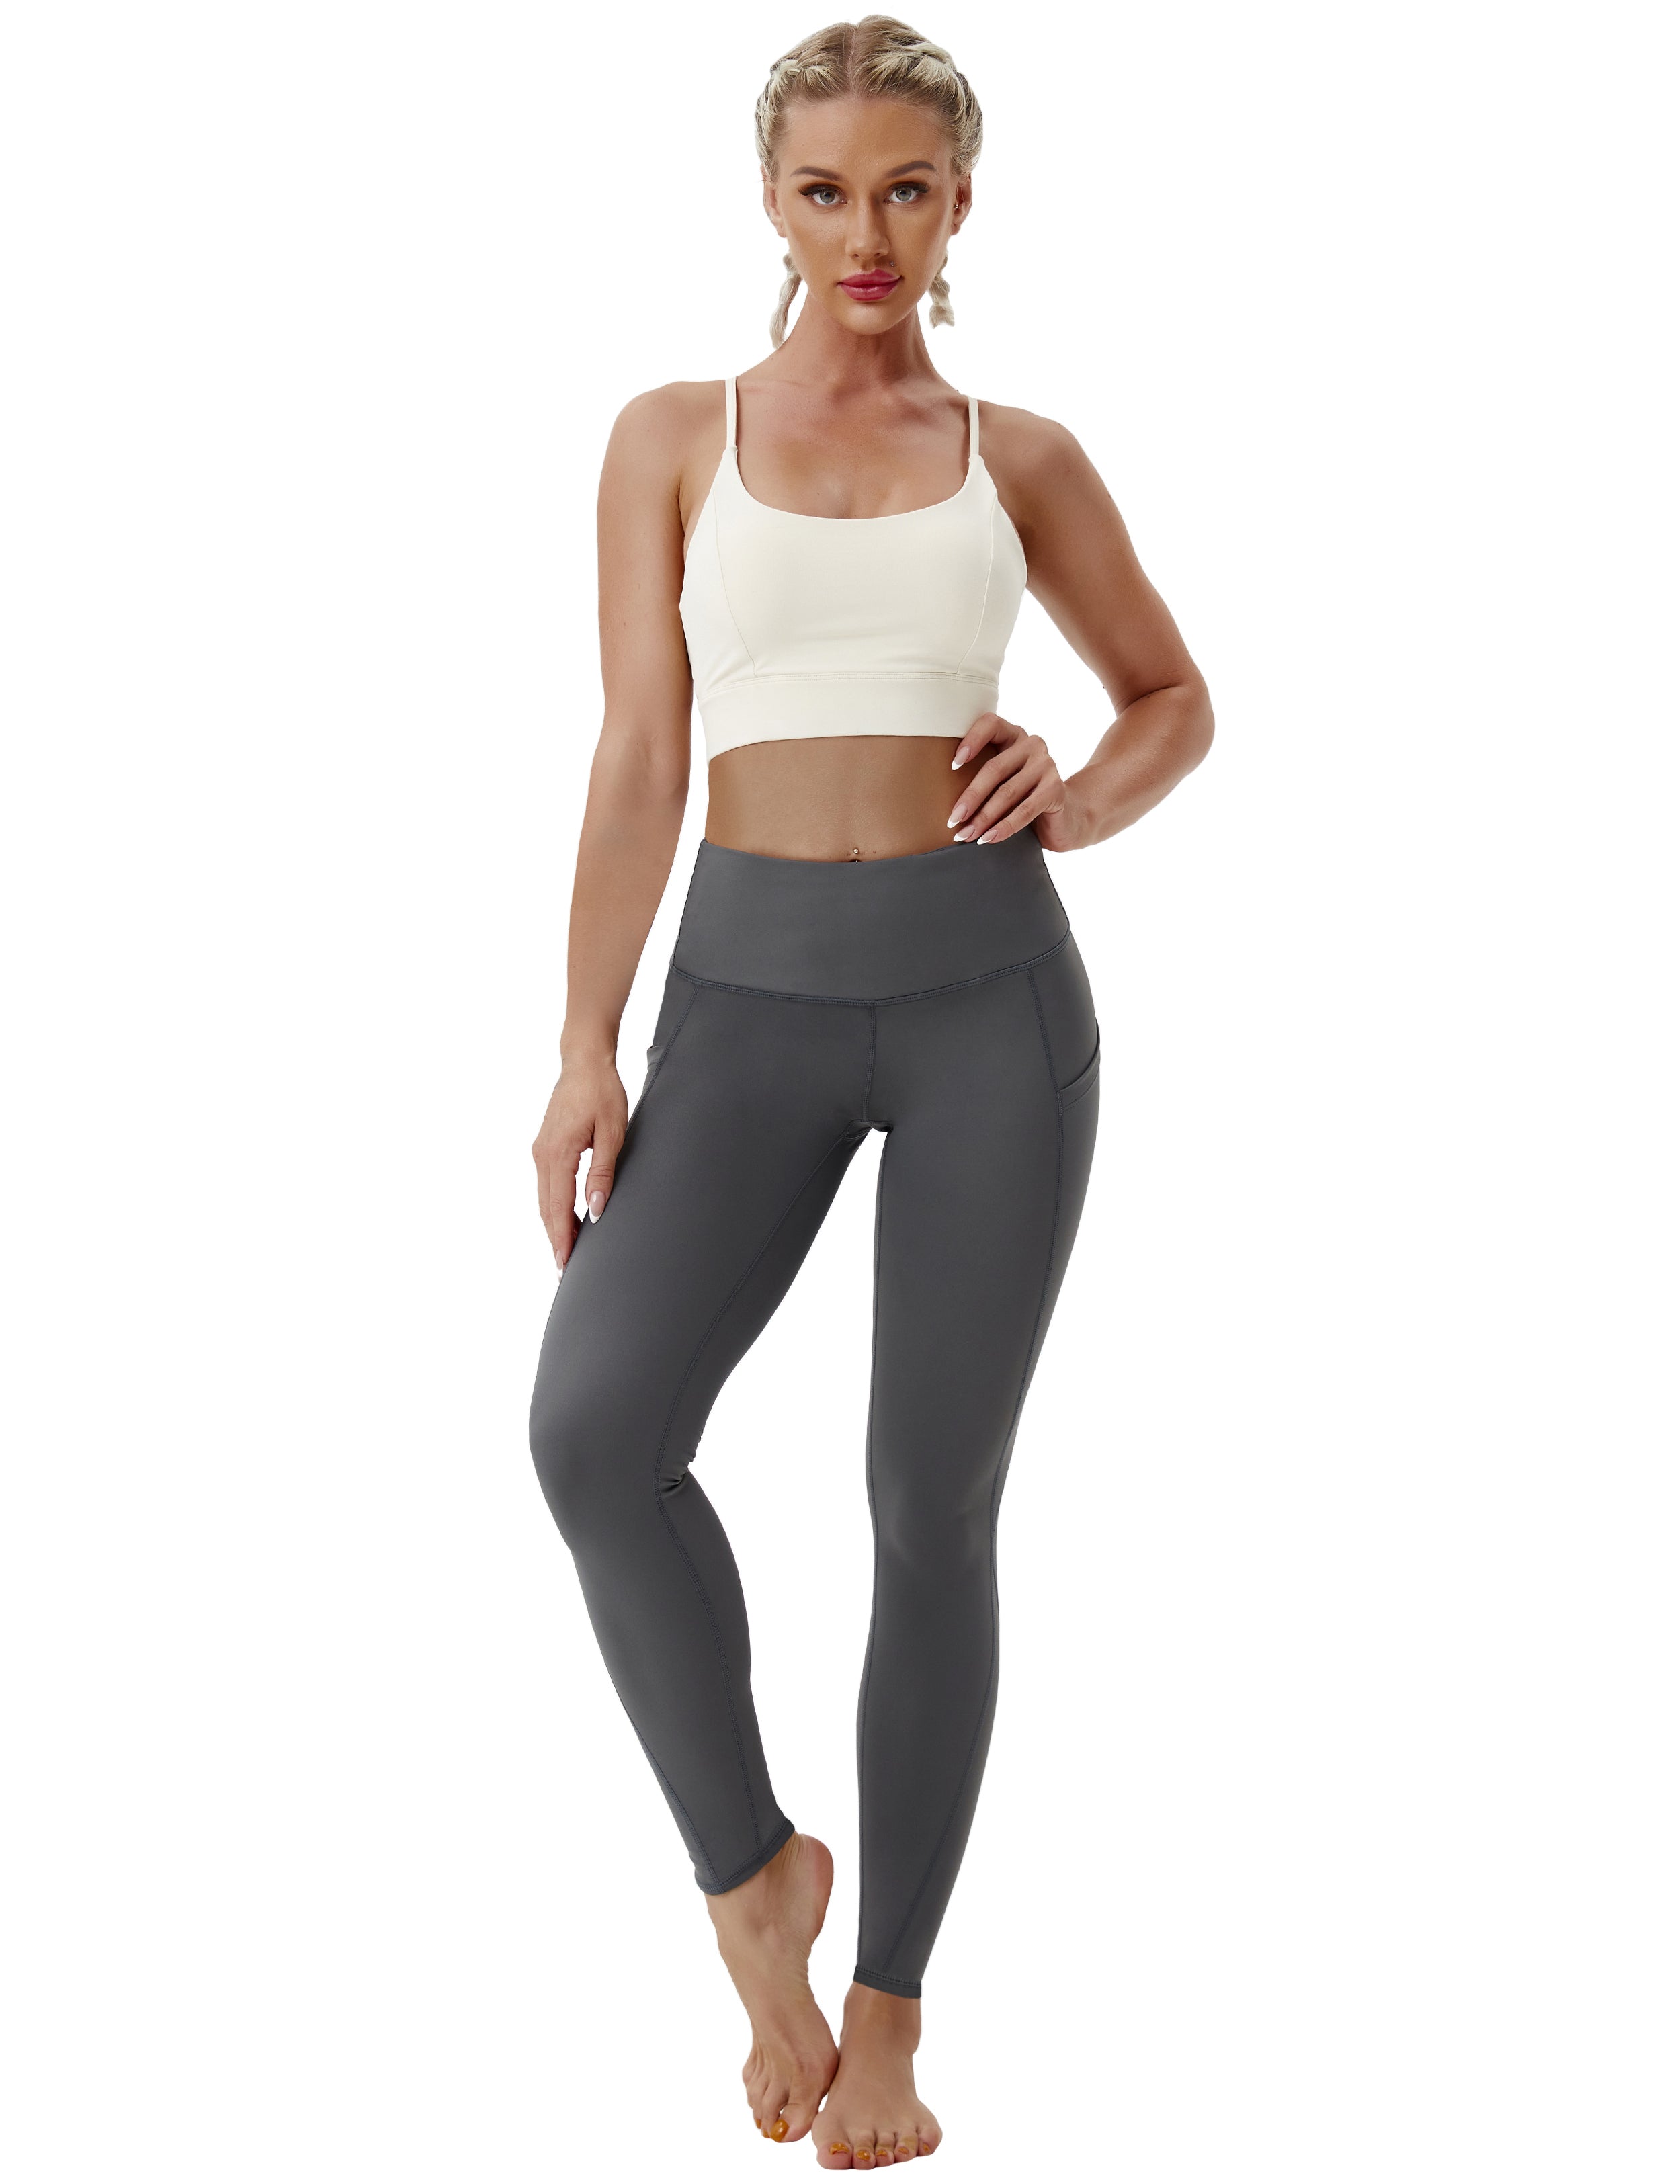 High Waist Side Pockets Gym Pants shadowcharcoal 75% Nylon, 25% Spandex Fabric doesn't attract lint easily 4-way stretch No see-through Moisture-wicking Tummy control Inner pocket